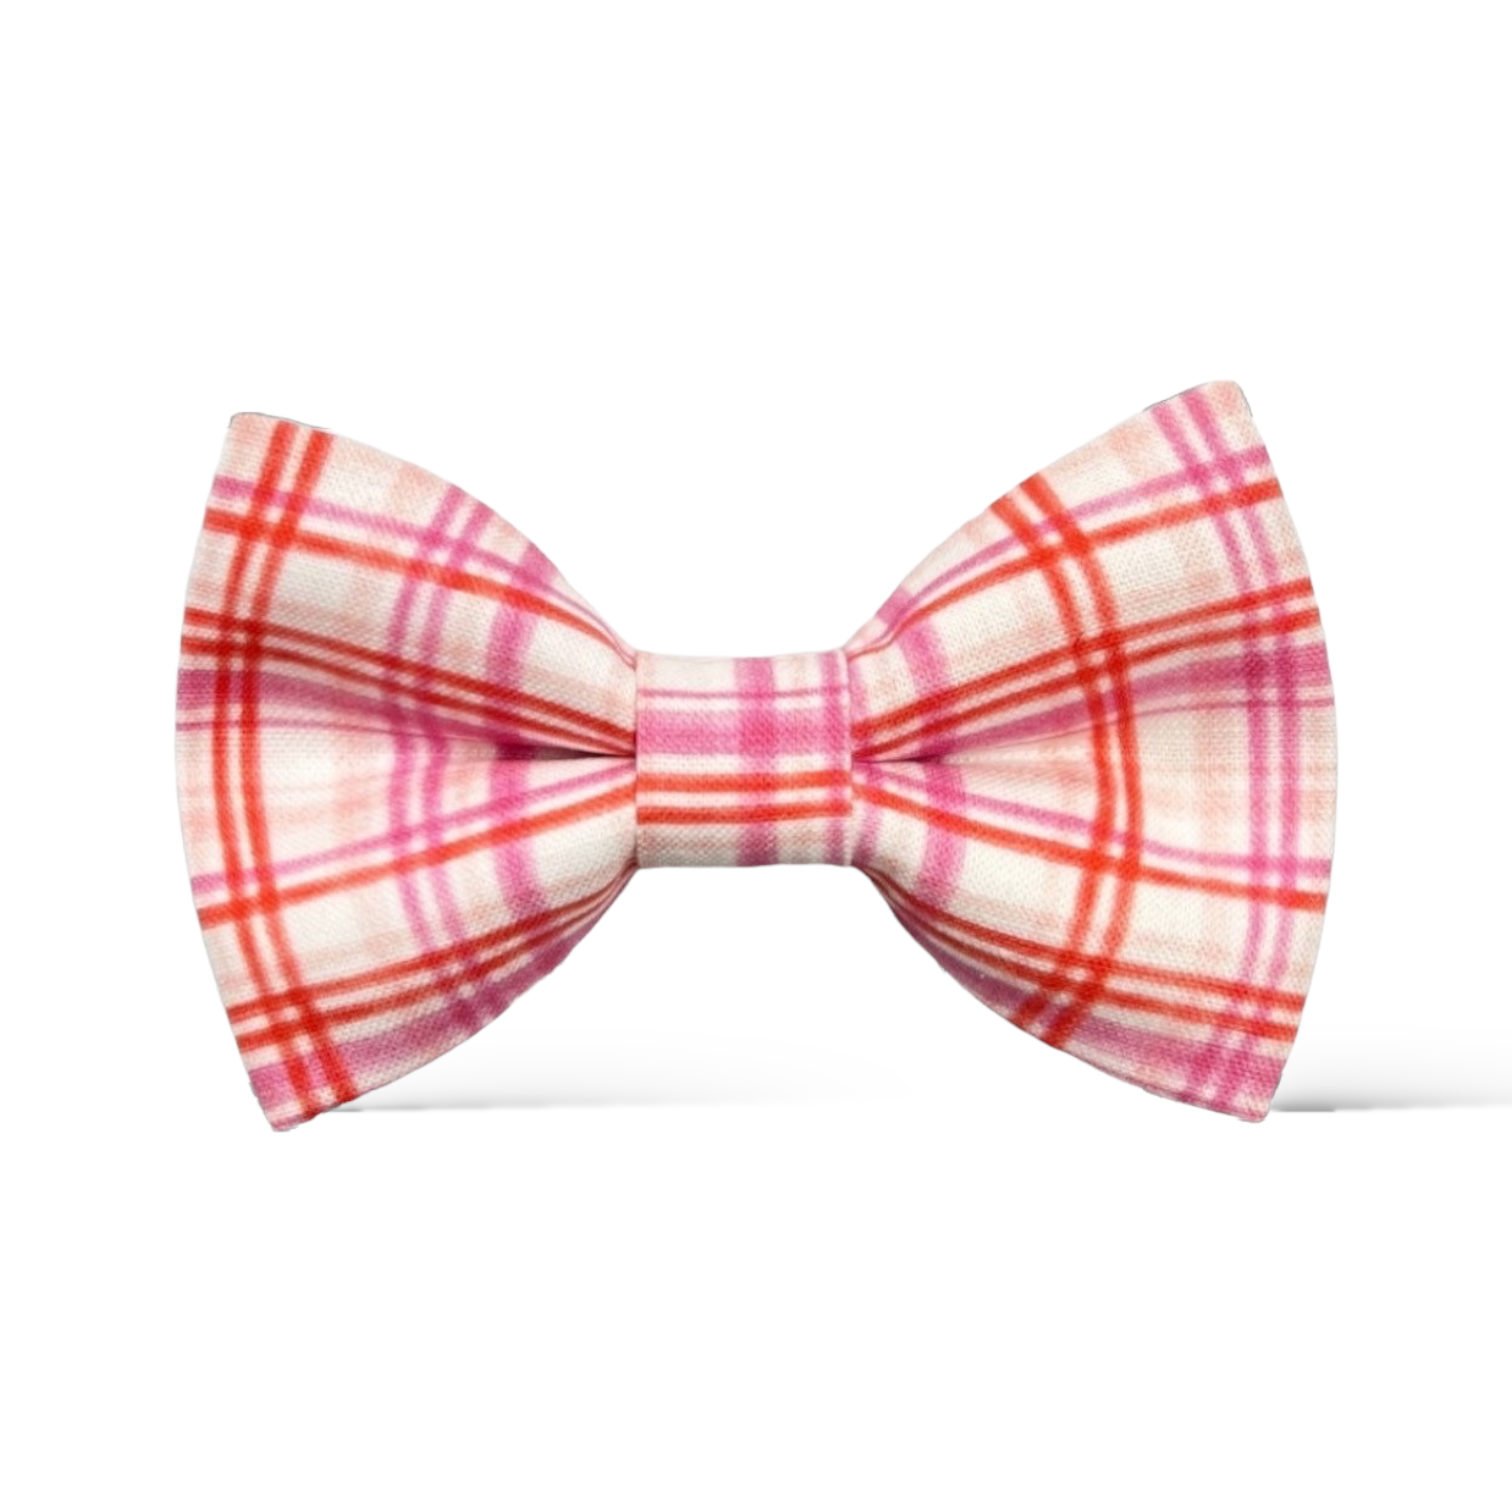 Pink & Red Plaid Bow Tie